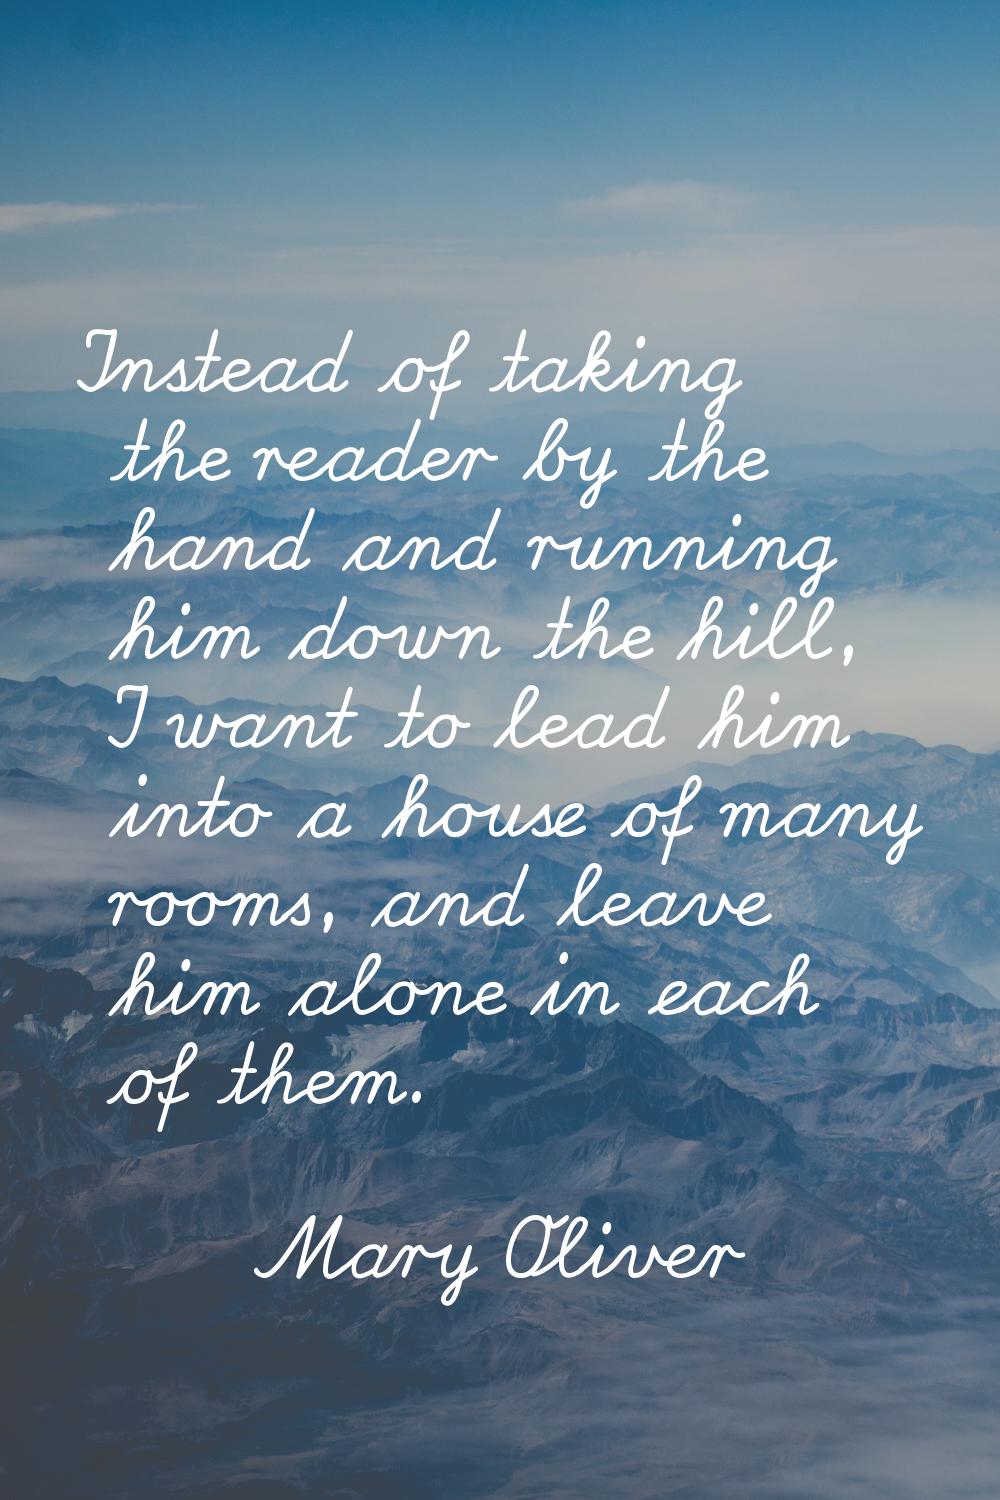 Instead of taking the reader by the hand and running him down the hill, I want to lead him into a h